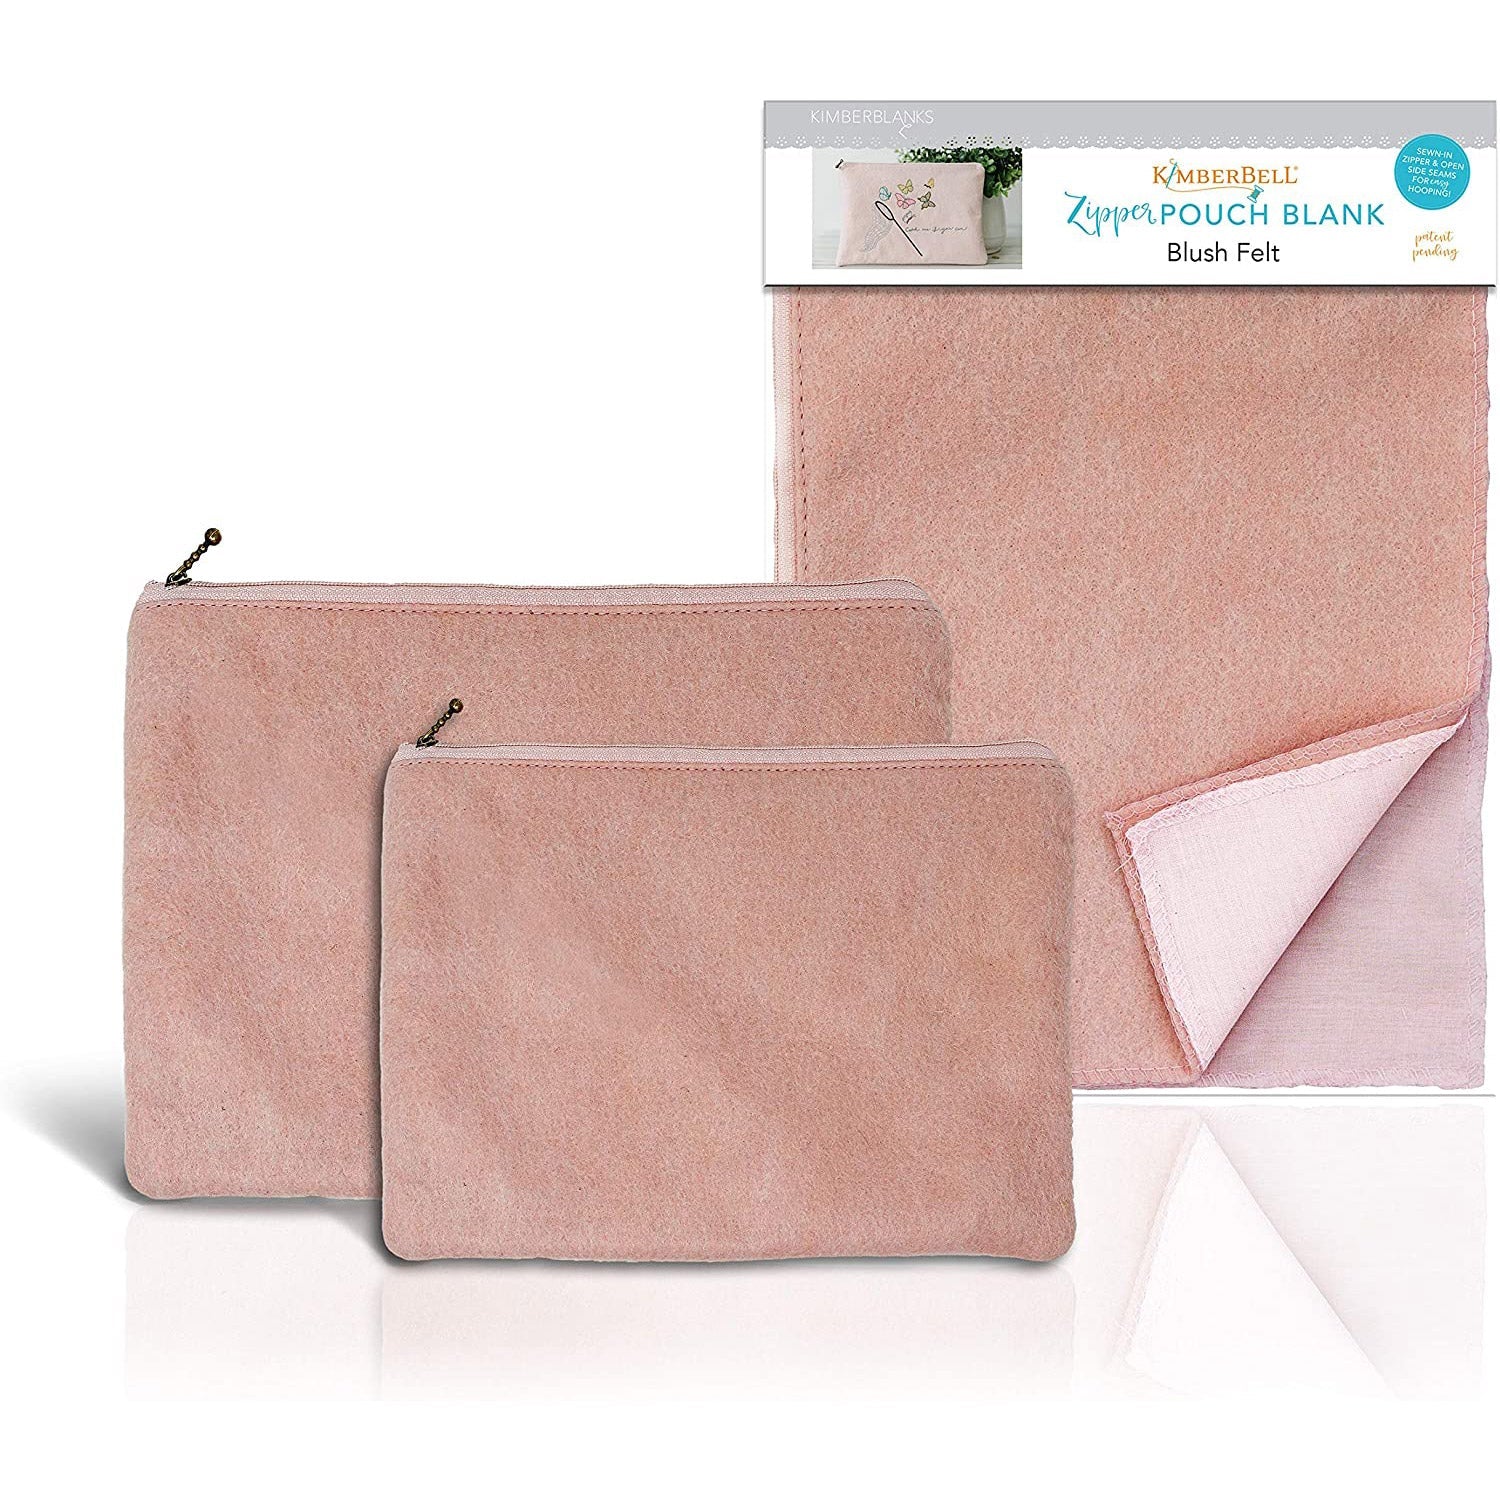 Zipper Pouch Blanks in Blush Pink Felt by Kimberbell is available in two sizes: Small (KDKB225) and Large (KDKB226). The patent pending design features an open side seam to make adding your favorite design or personalization easier than ever, and a simple straight stitch completes the bag after the design is added.  Each bag is fully lined and features a decorative zipper pull.